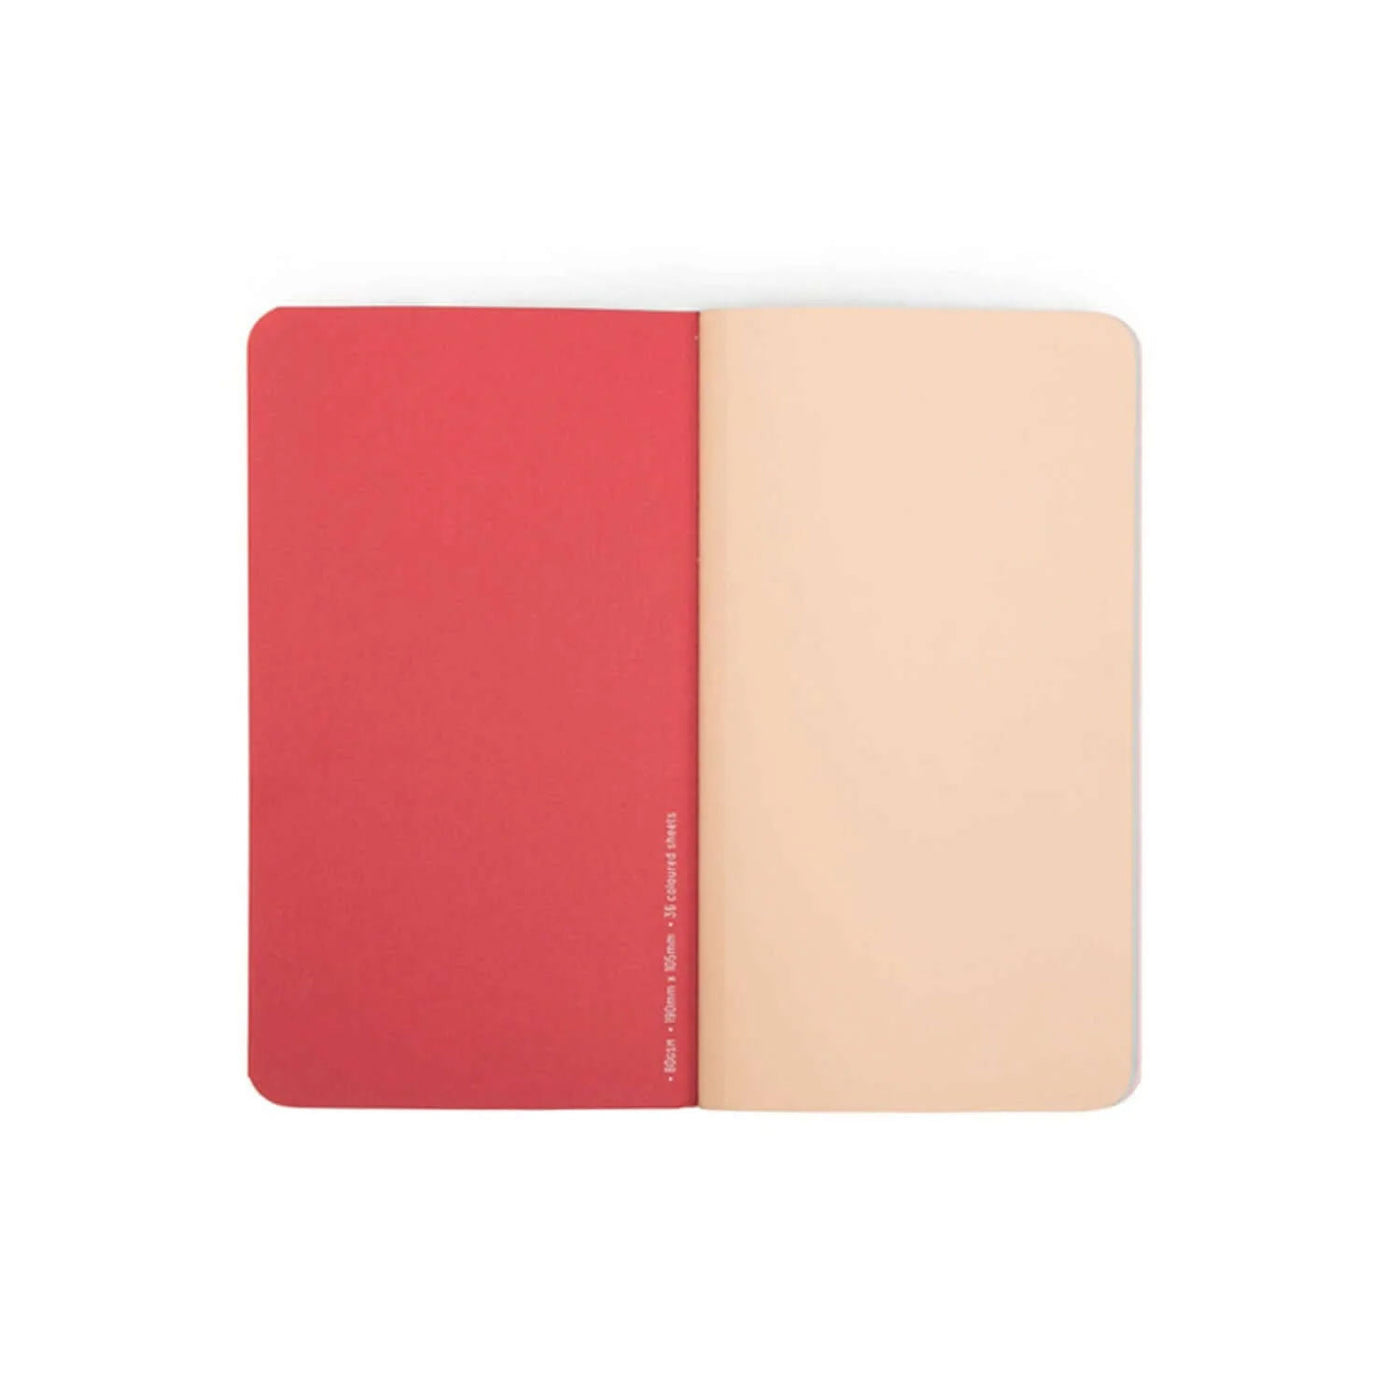 Pennline Quikfill Notebook Refill For Quikrite, Red - Set Of 2 3